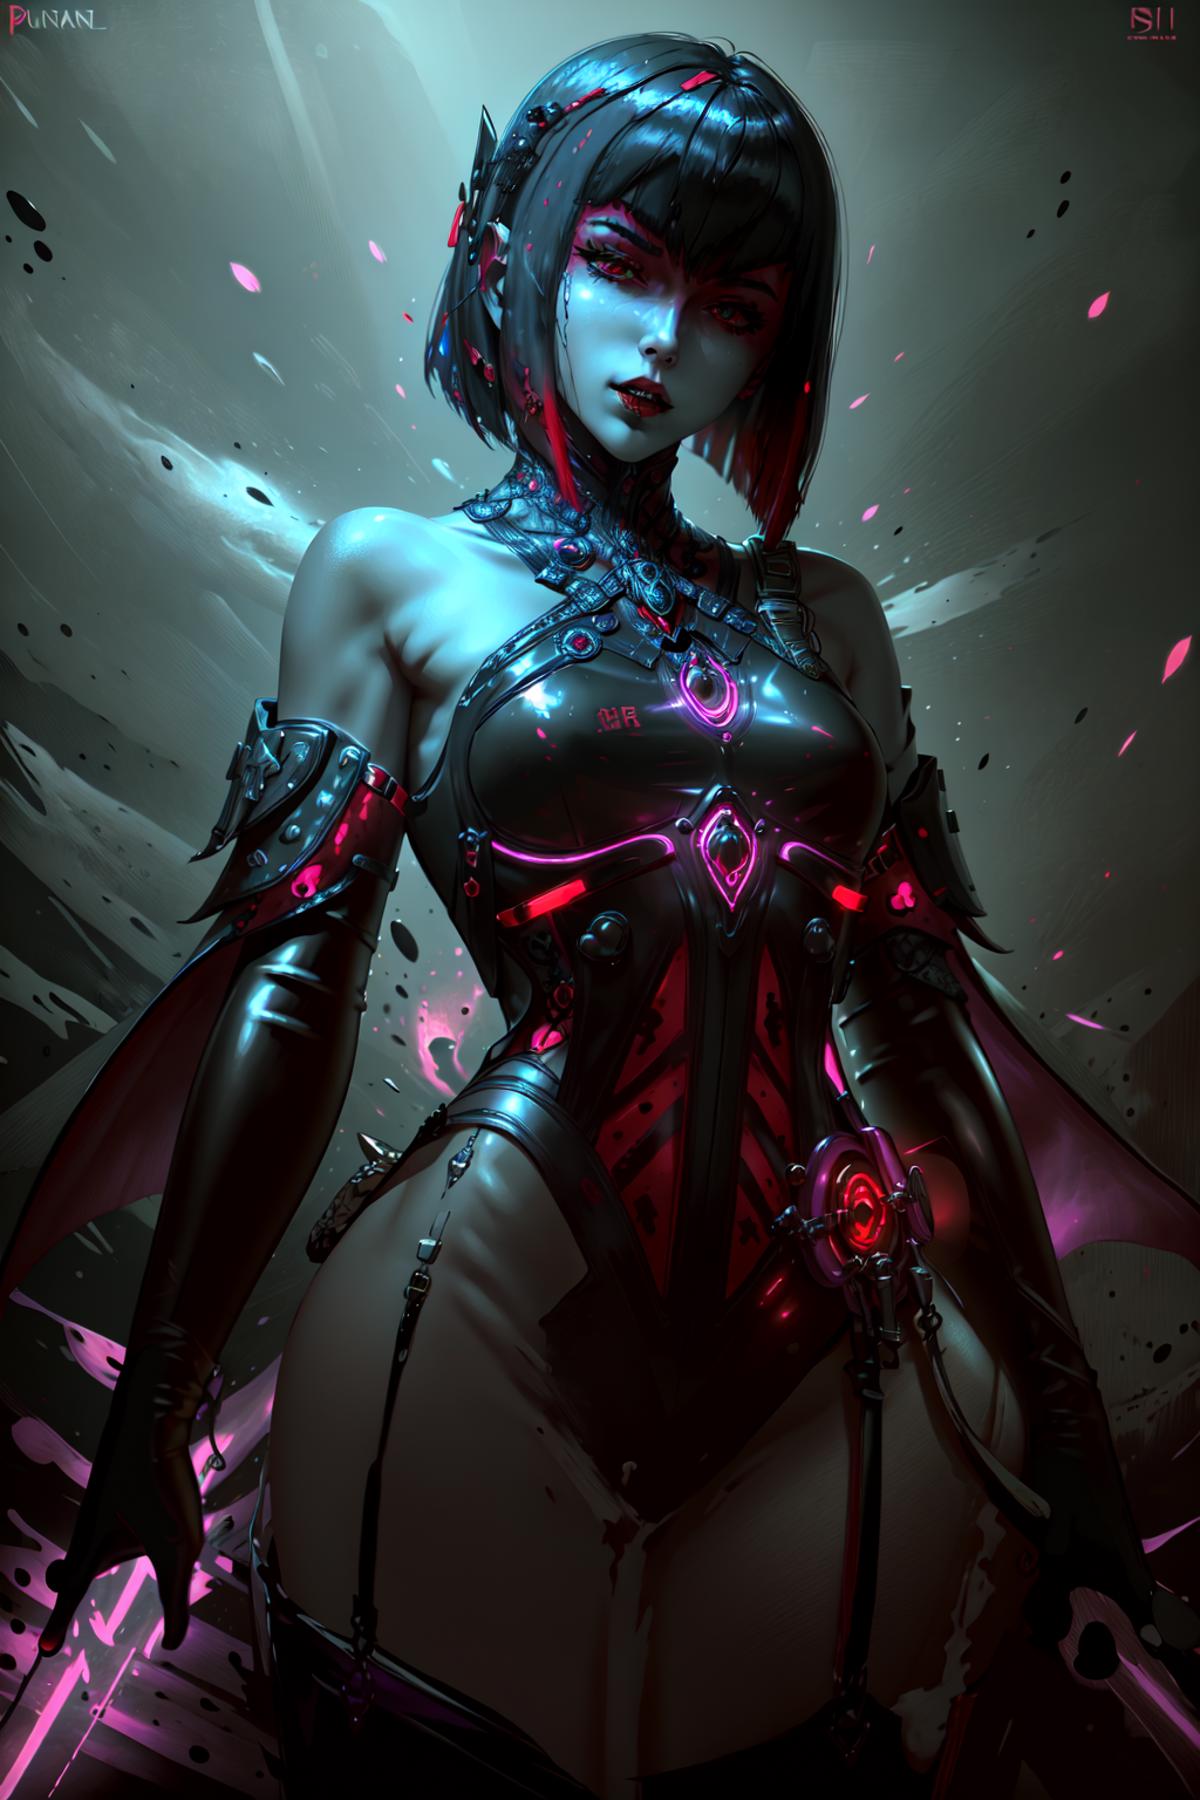 Countess (paragon) image by Code_Breaker_Umbra